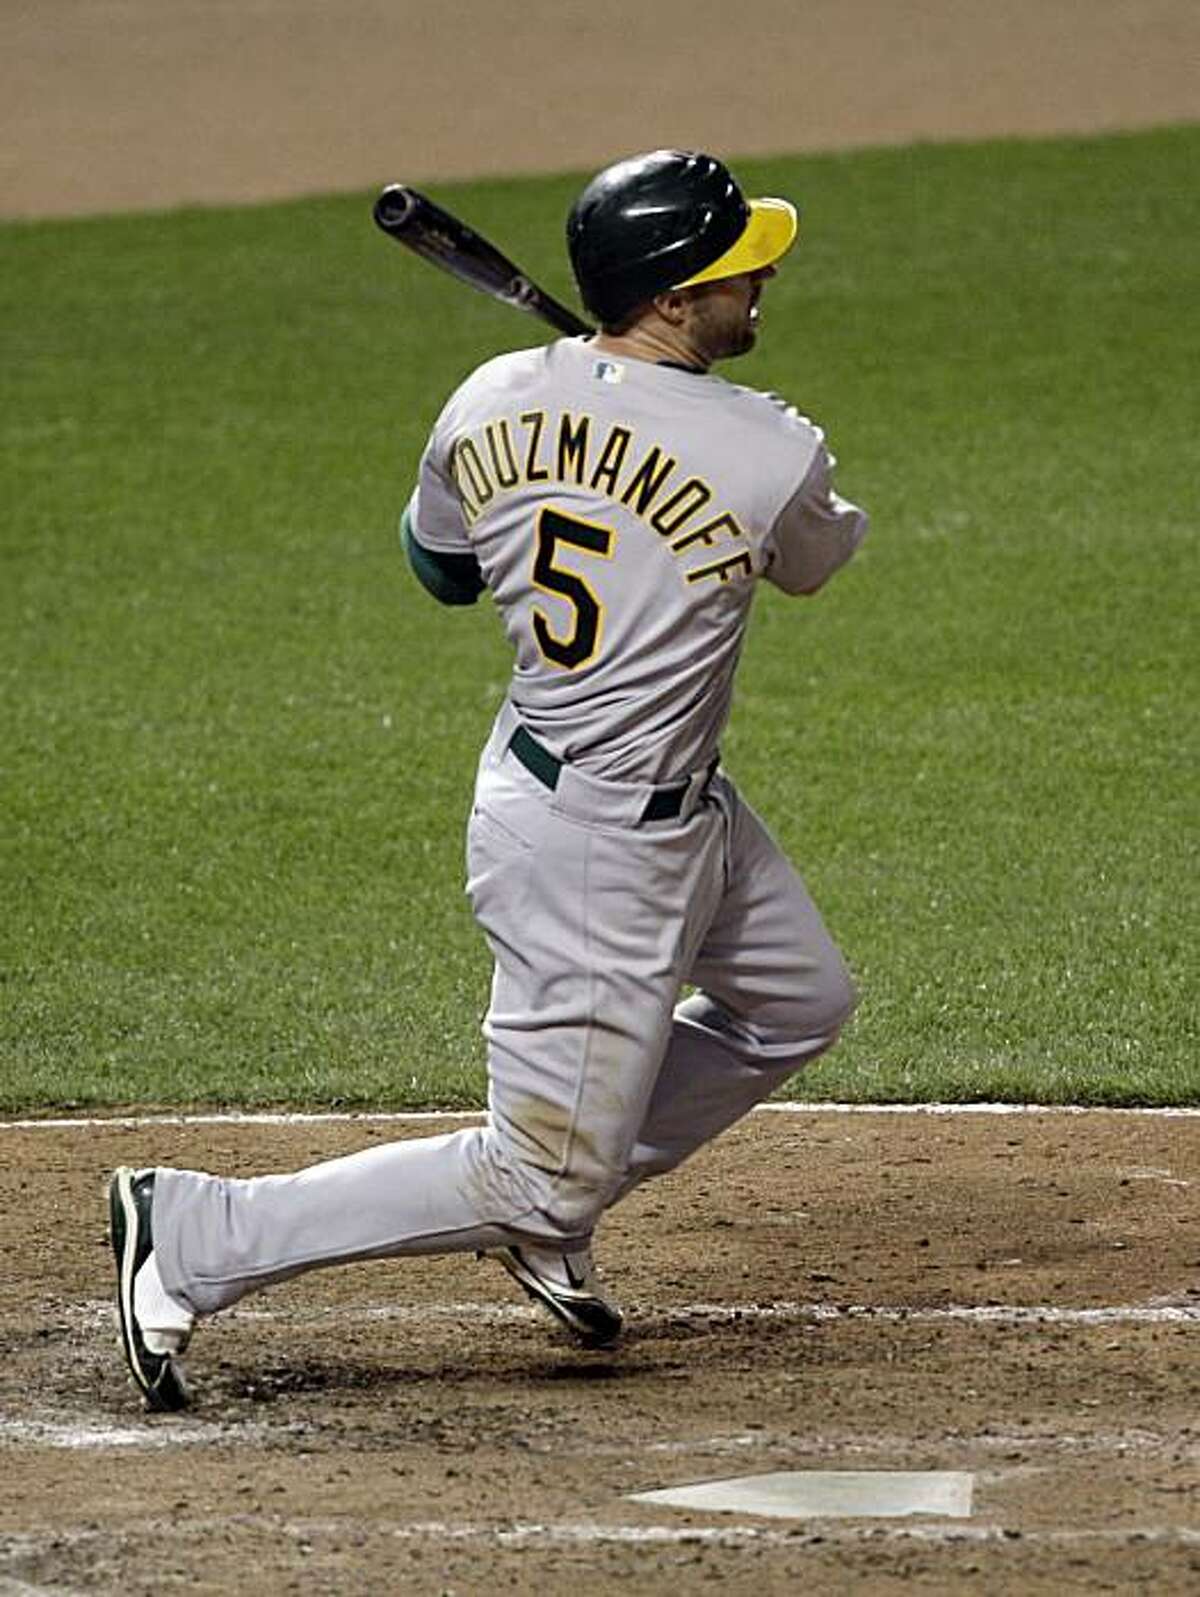 Oakland Athletics' Kevin Kouzmanoff follows his three-RBI double against the Baltimore Orioles during the eighth inning of a baseball game, Thursday, May 27, 2010, in Baltimore. The Athletics won 7-5.